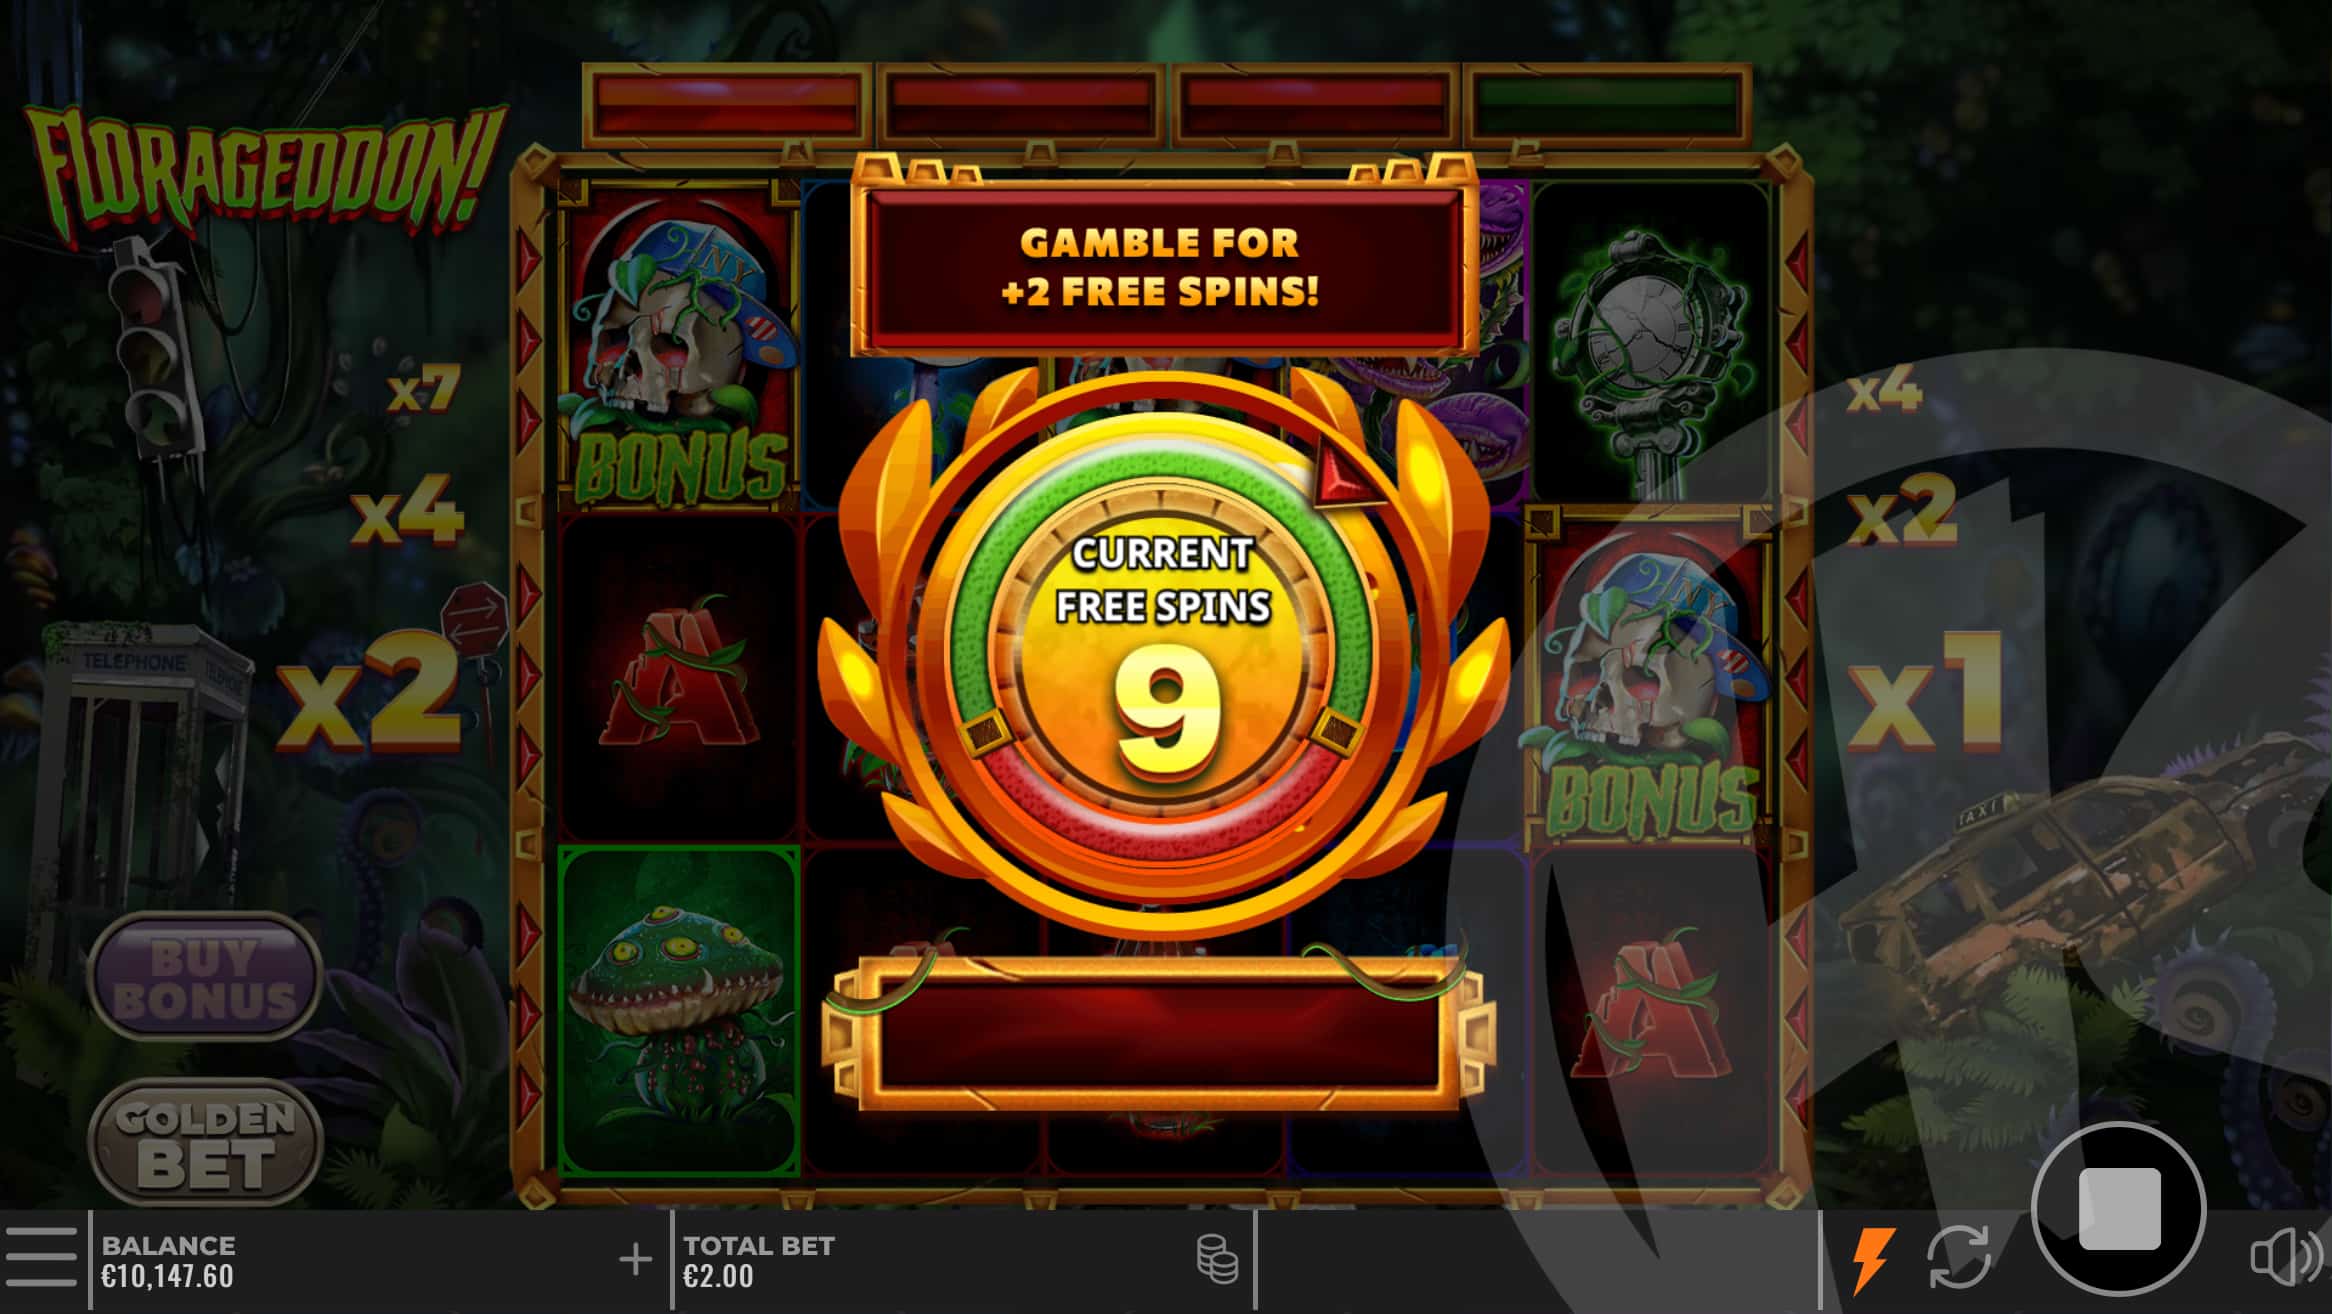 Gamble Up To 16 Free Spins